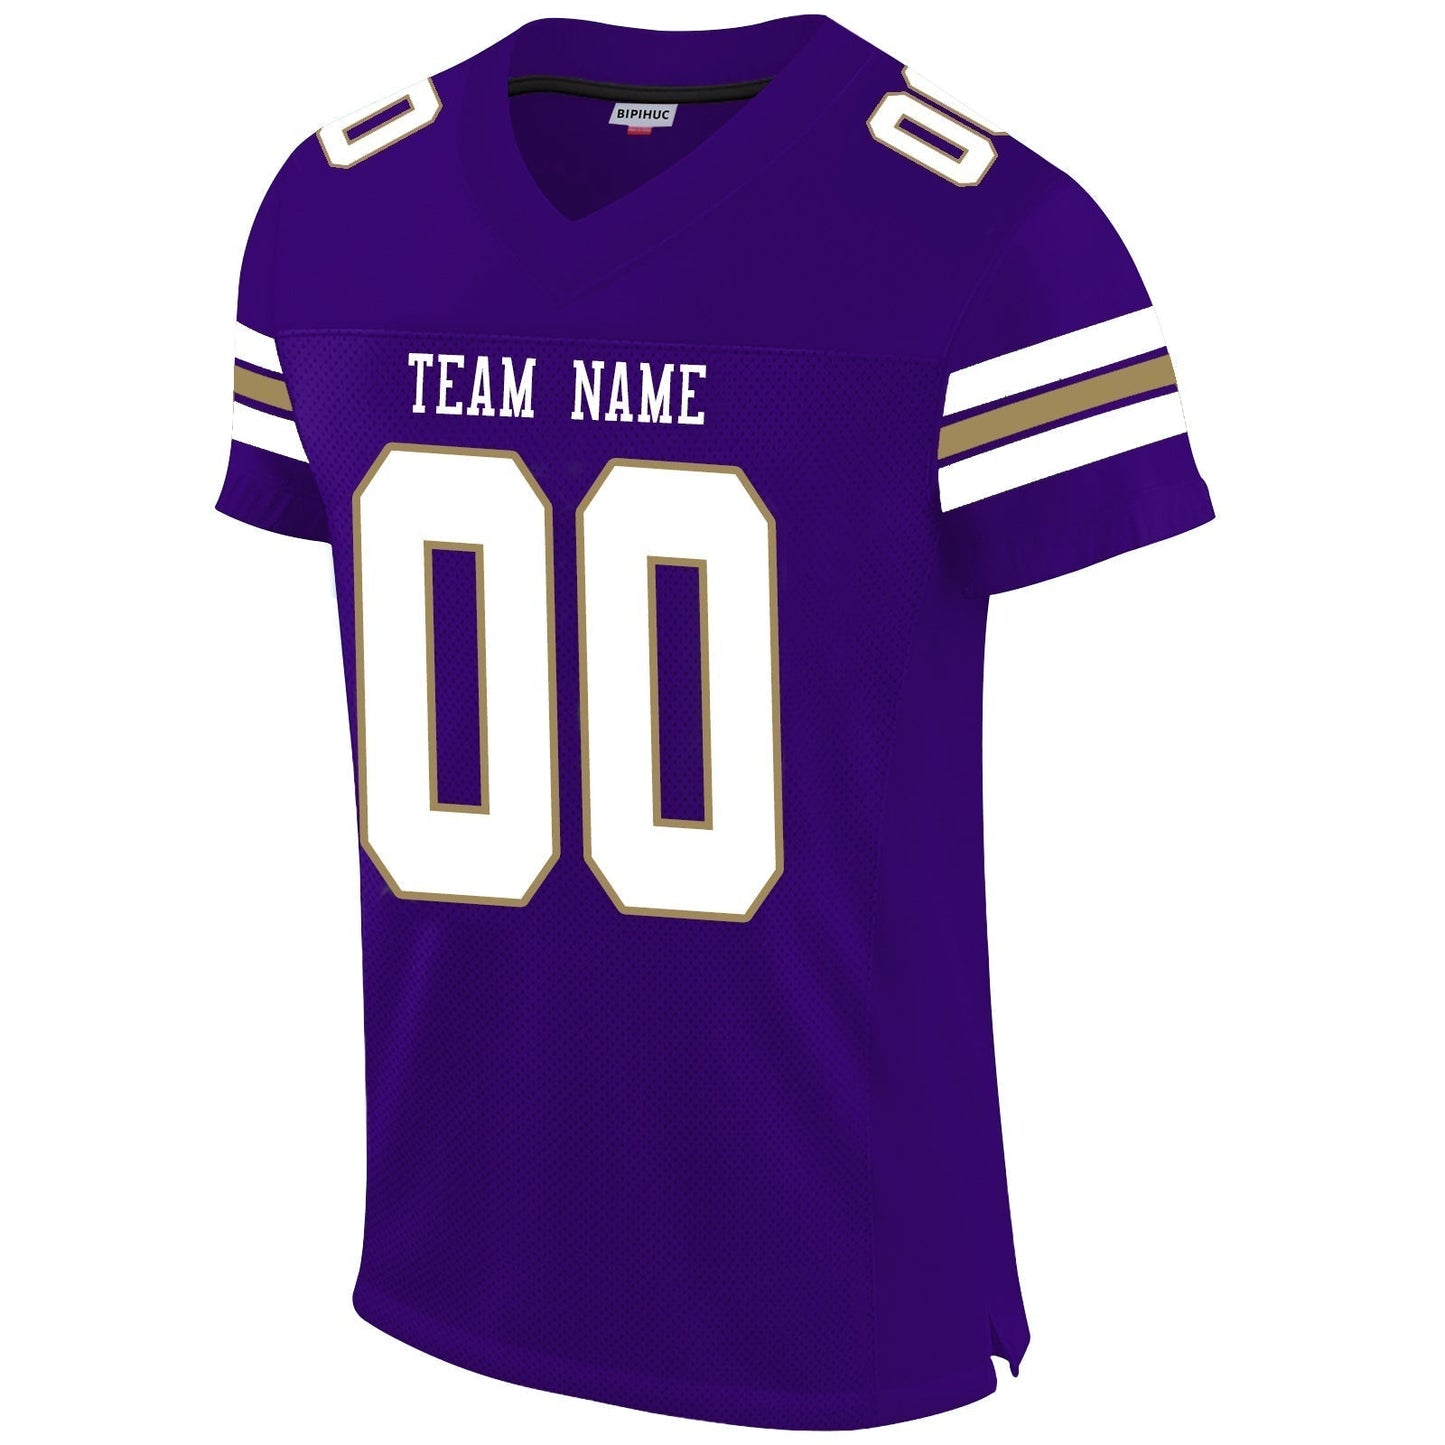 Custom B.Ravens Football Jerseys Team Name And Number for Men Youth Women Purple Christmas Birthday Gifts Jersey